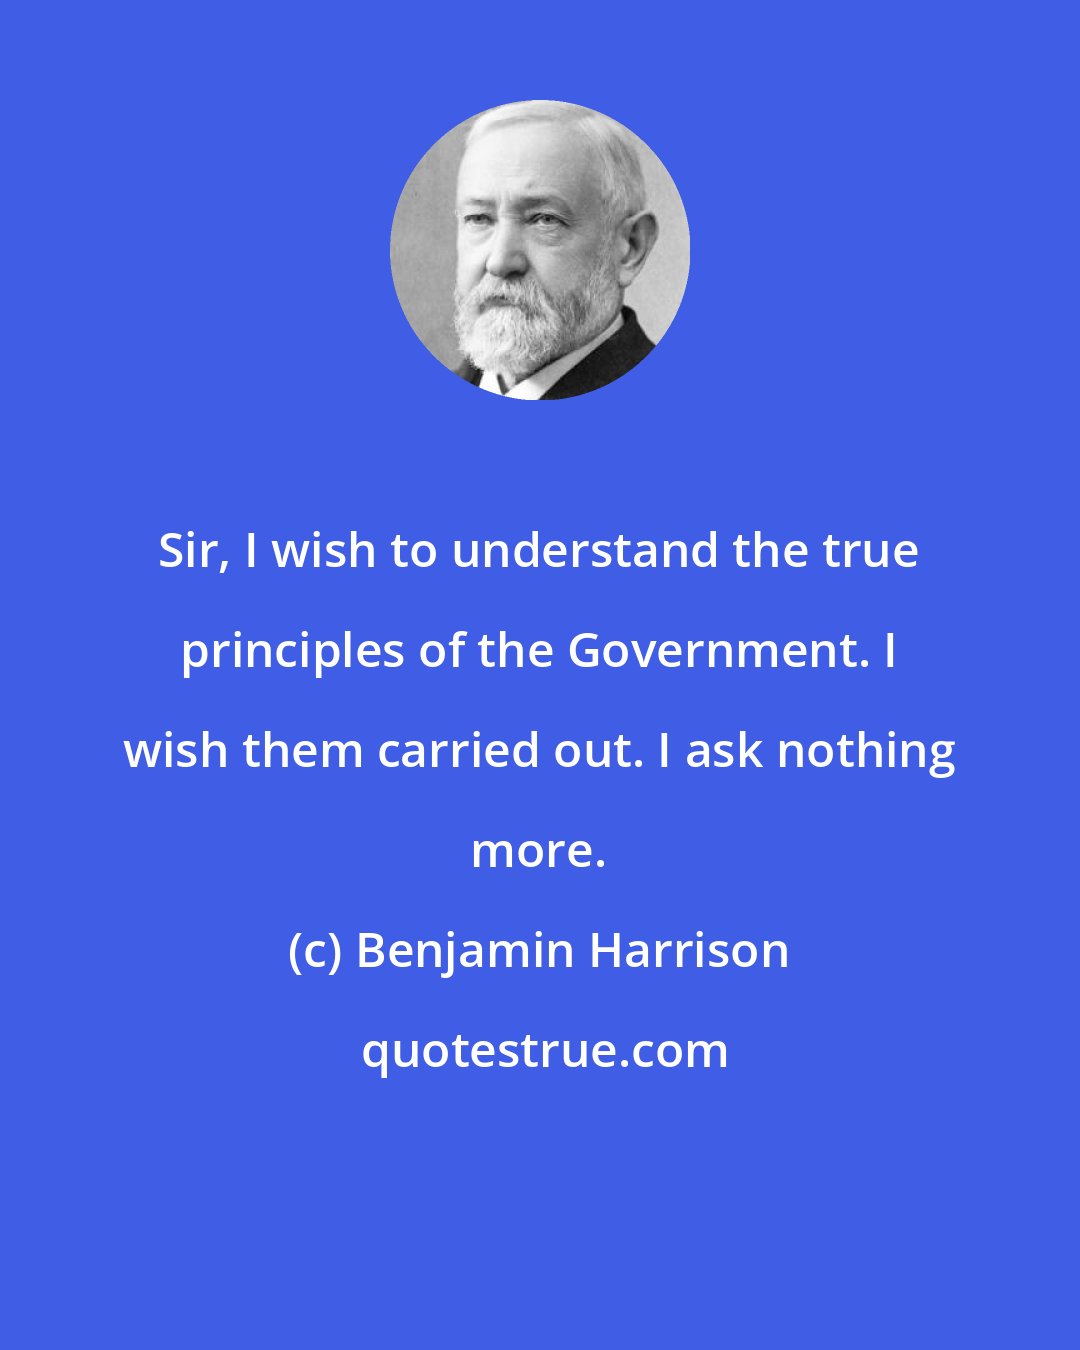 Benjamin Harrison: Sir, I wish to understand the true principles of the Government. I wish them carried out. I ask nothing more.